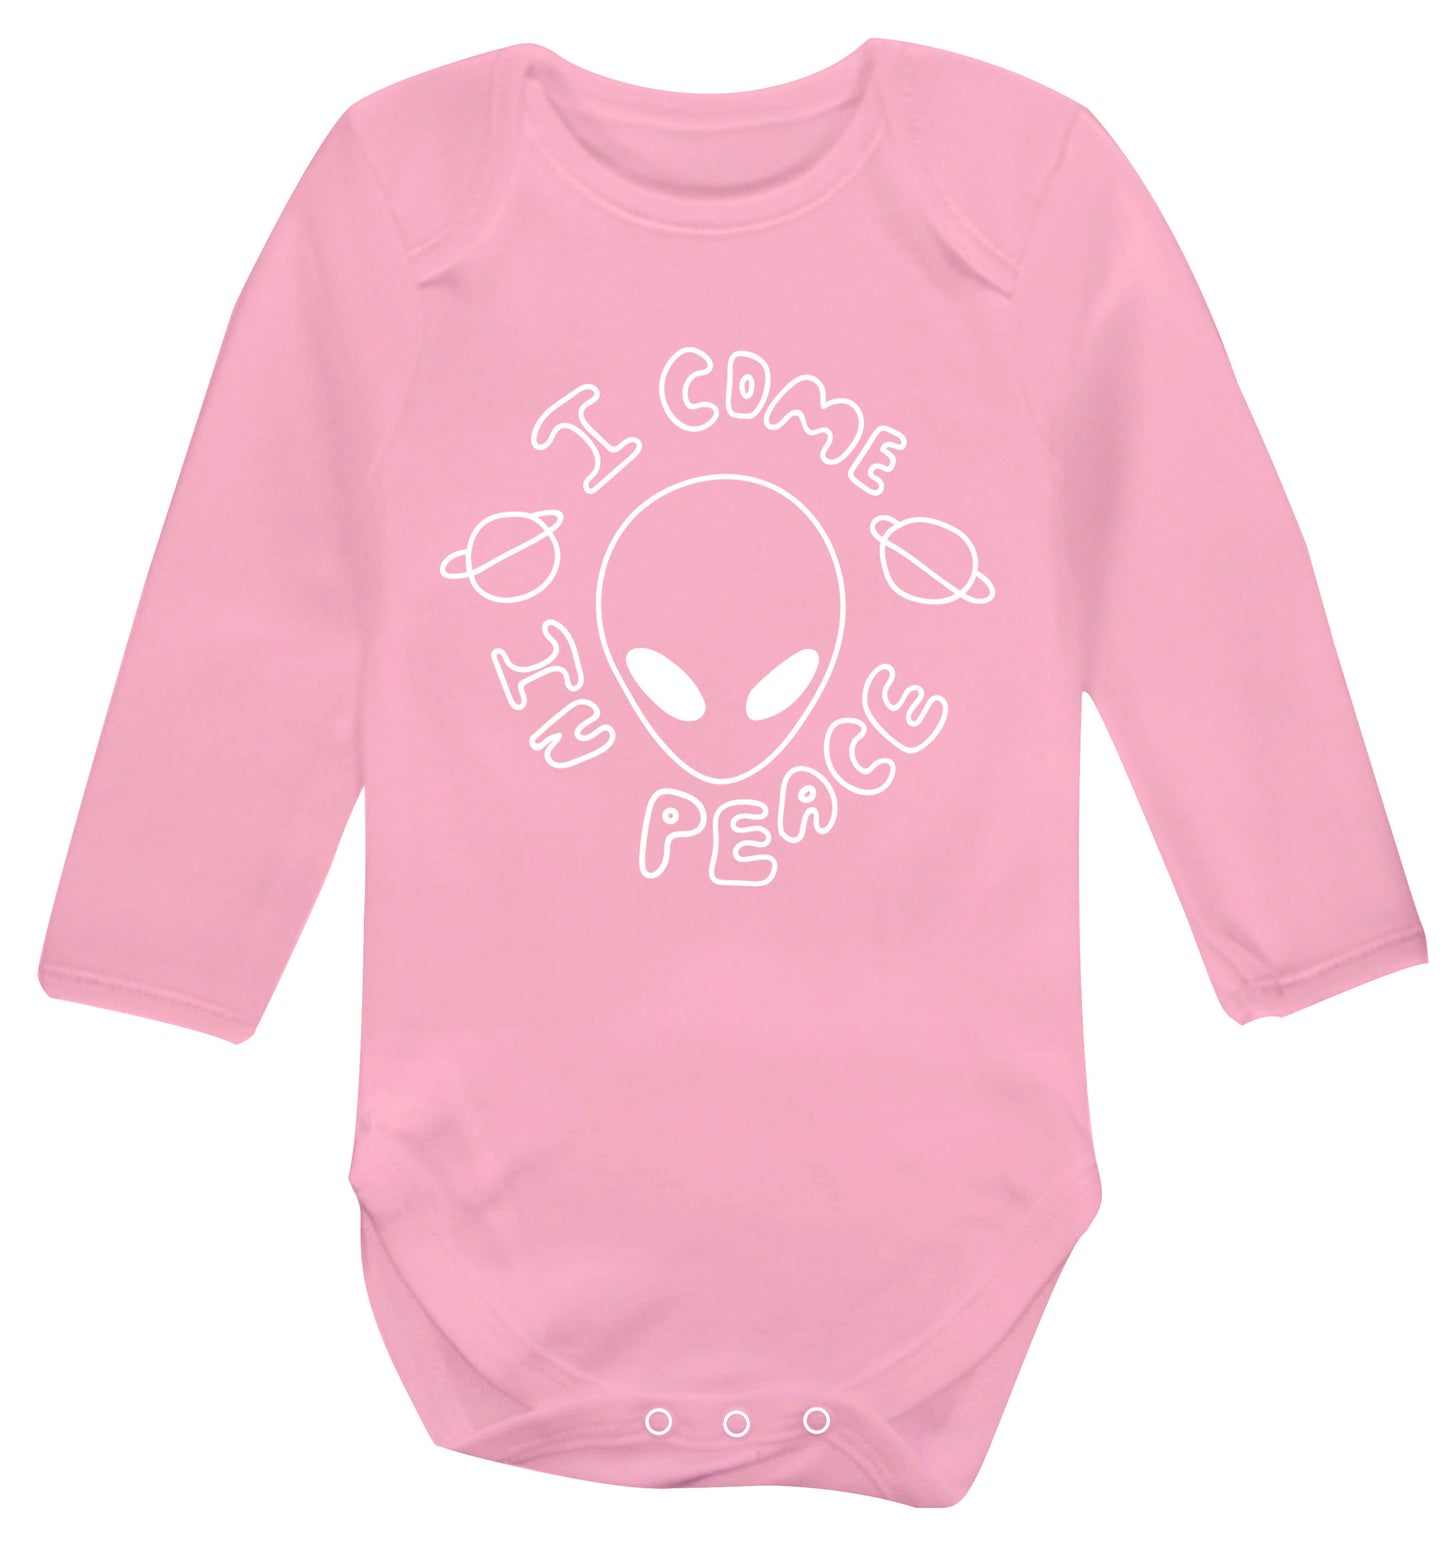 I come in peace Baby Vest long sleeved pale pink 6-12 months